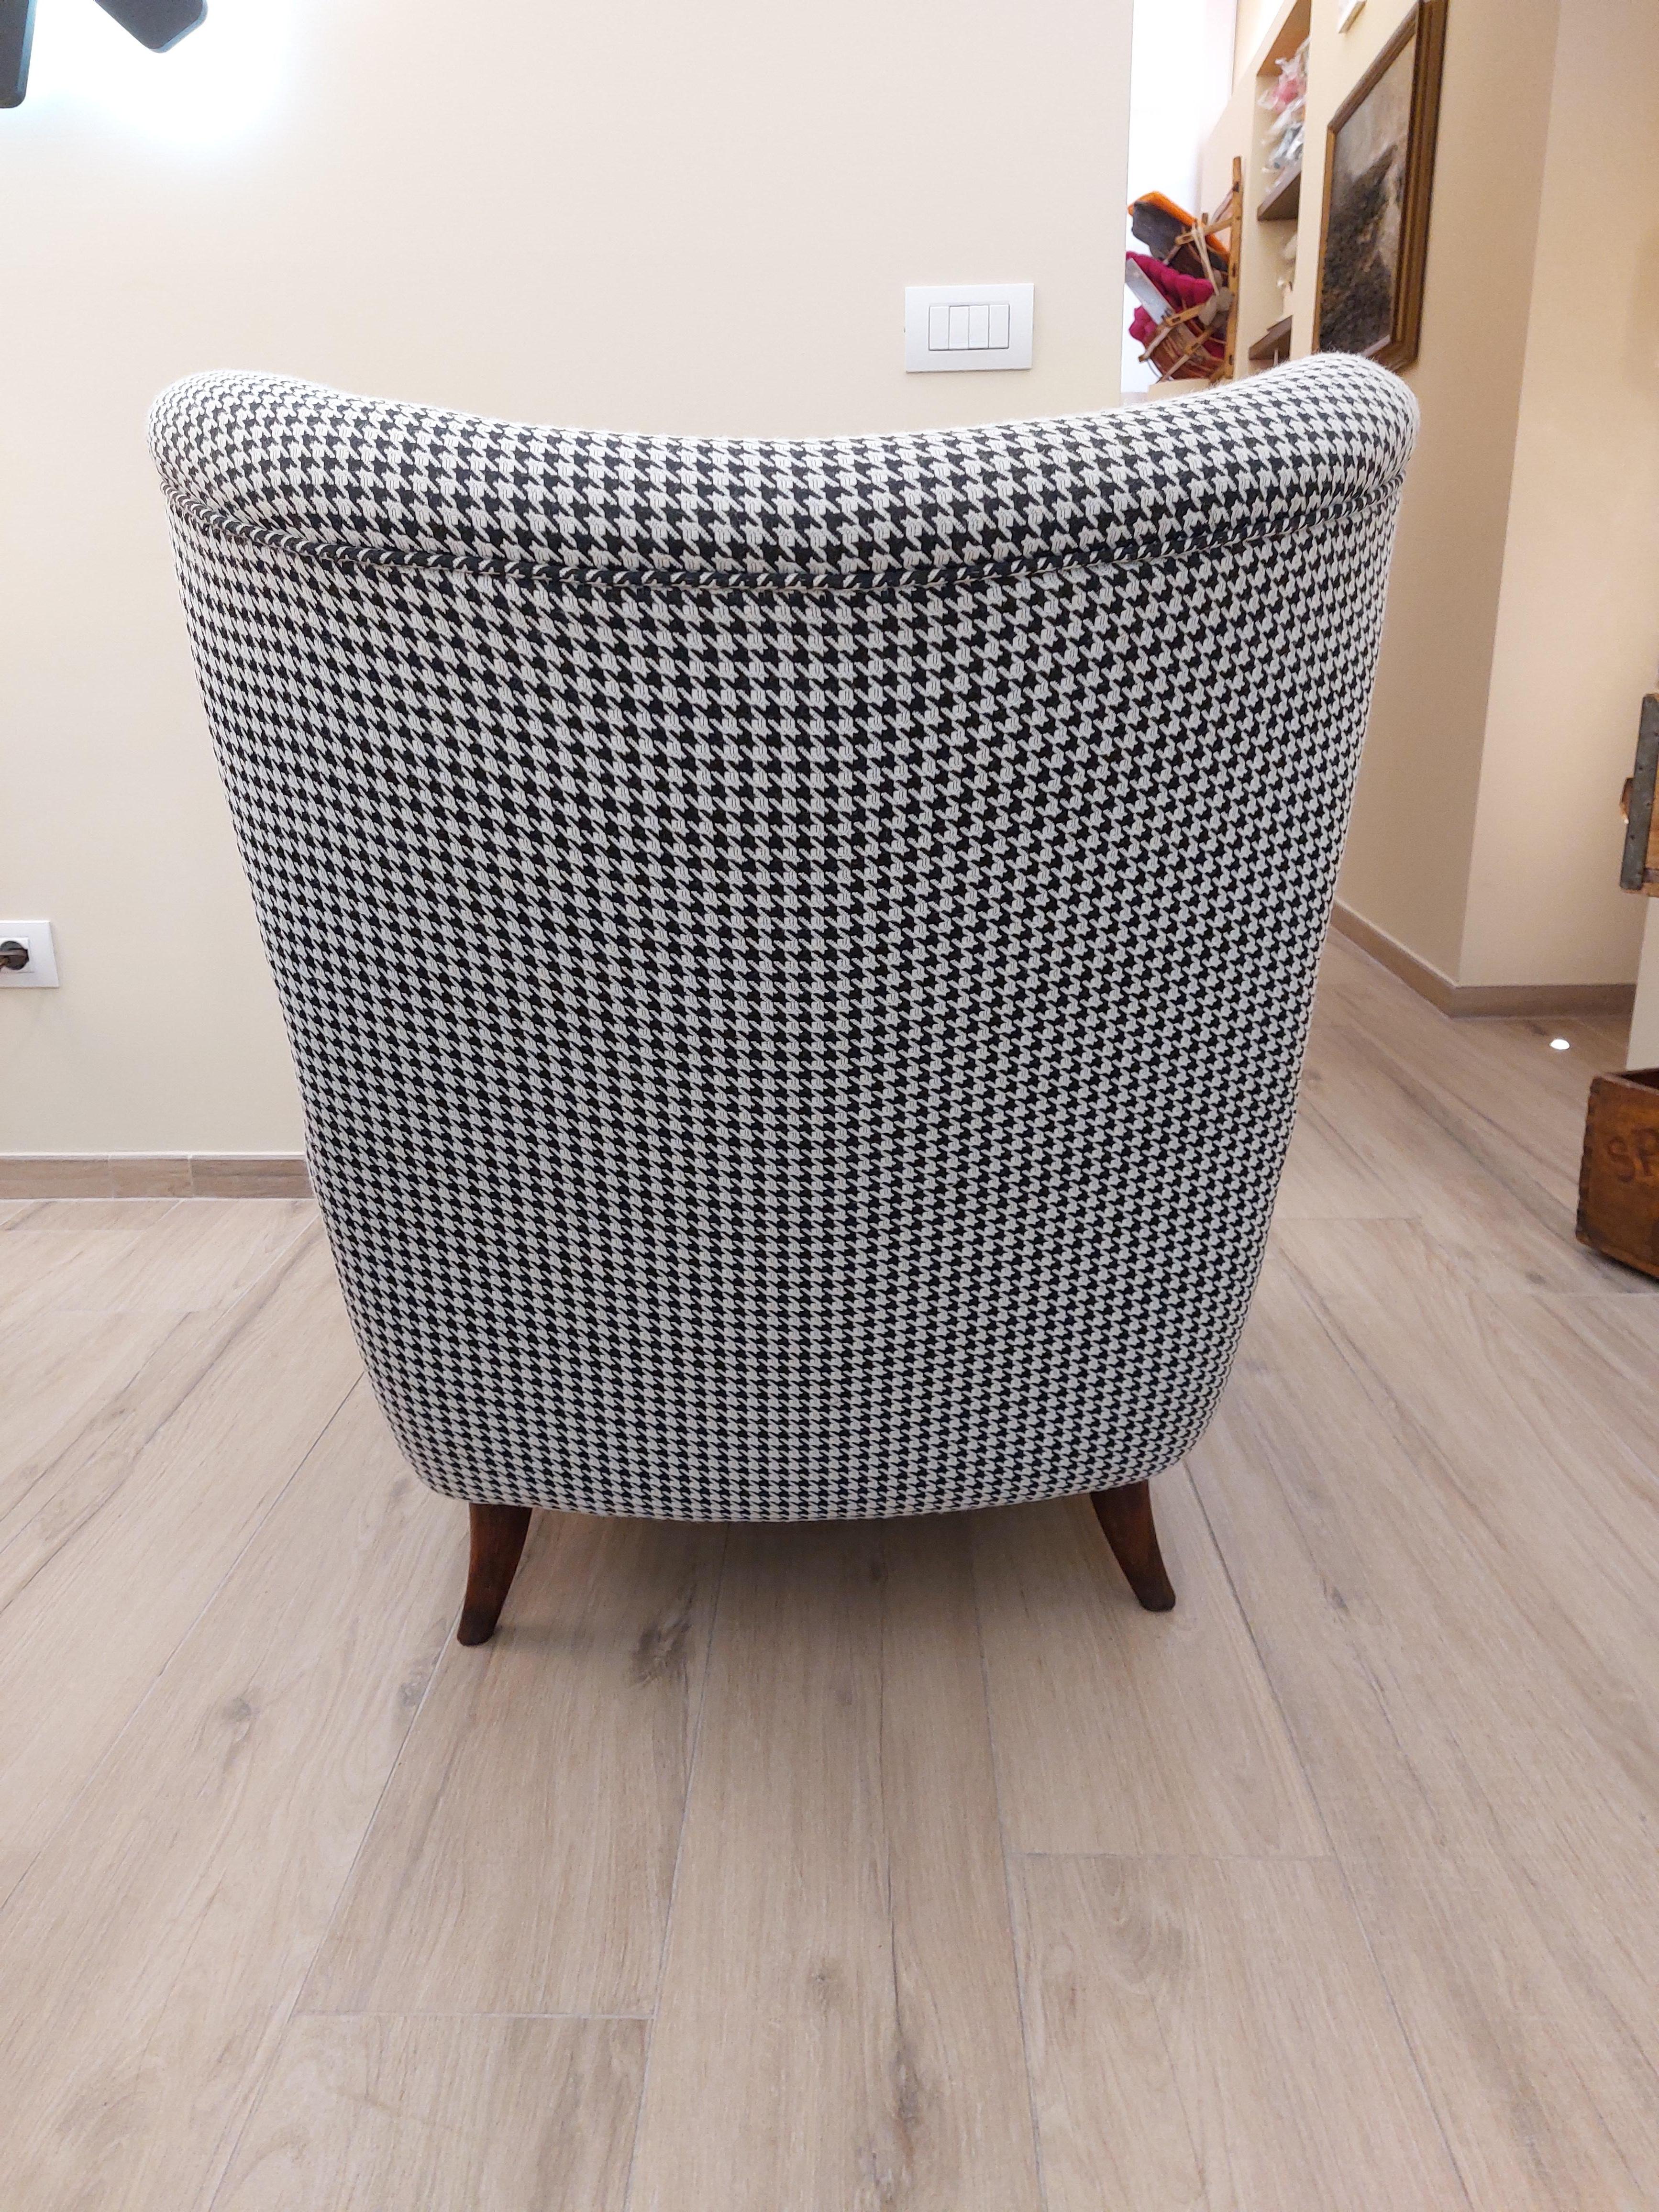 '40s Armchair with New Houndstooth Upholstery 1